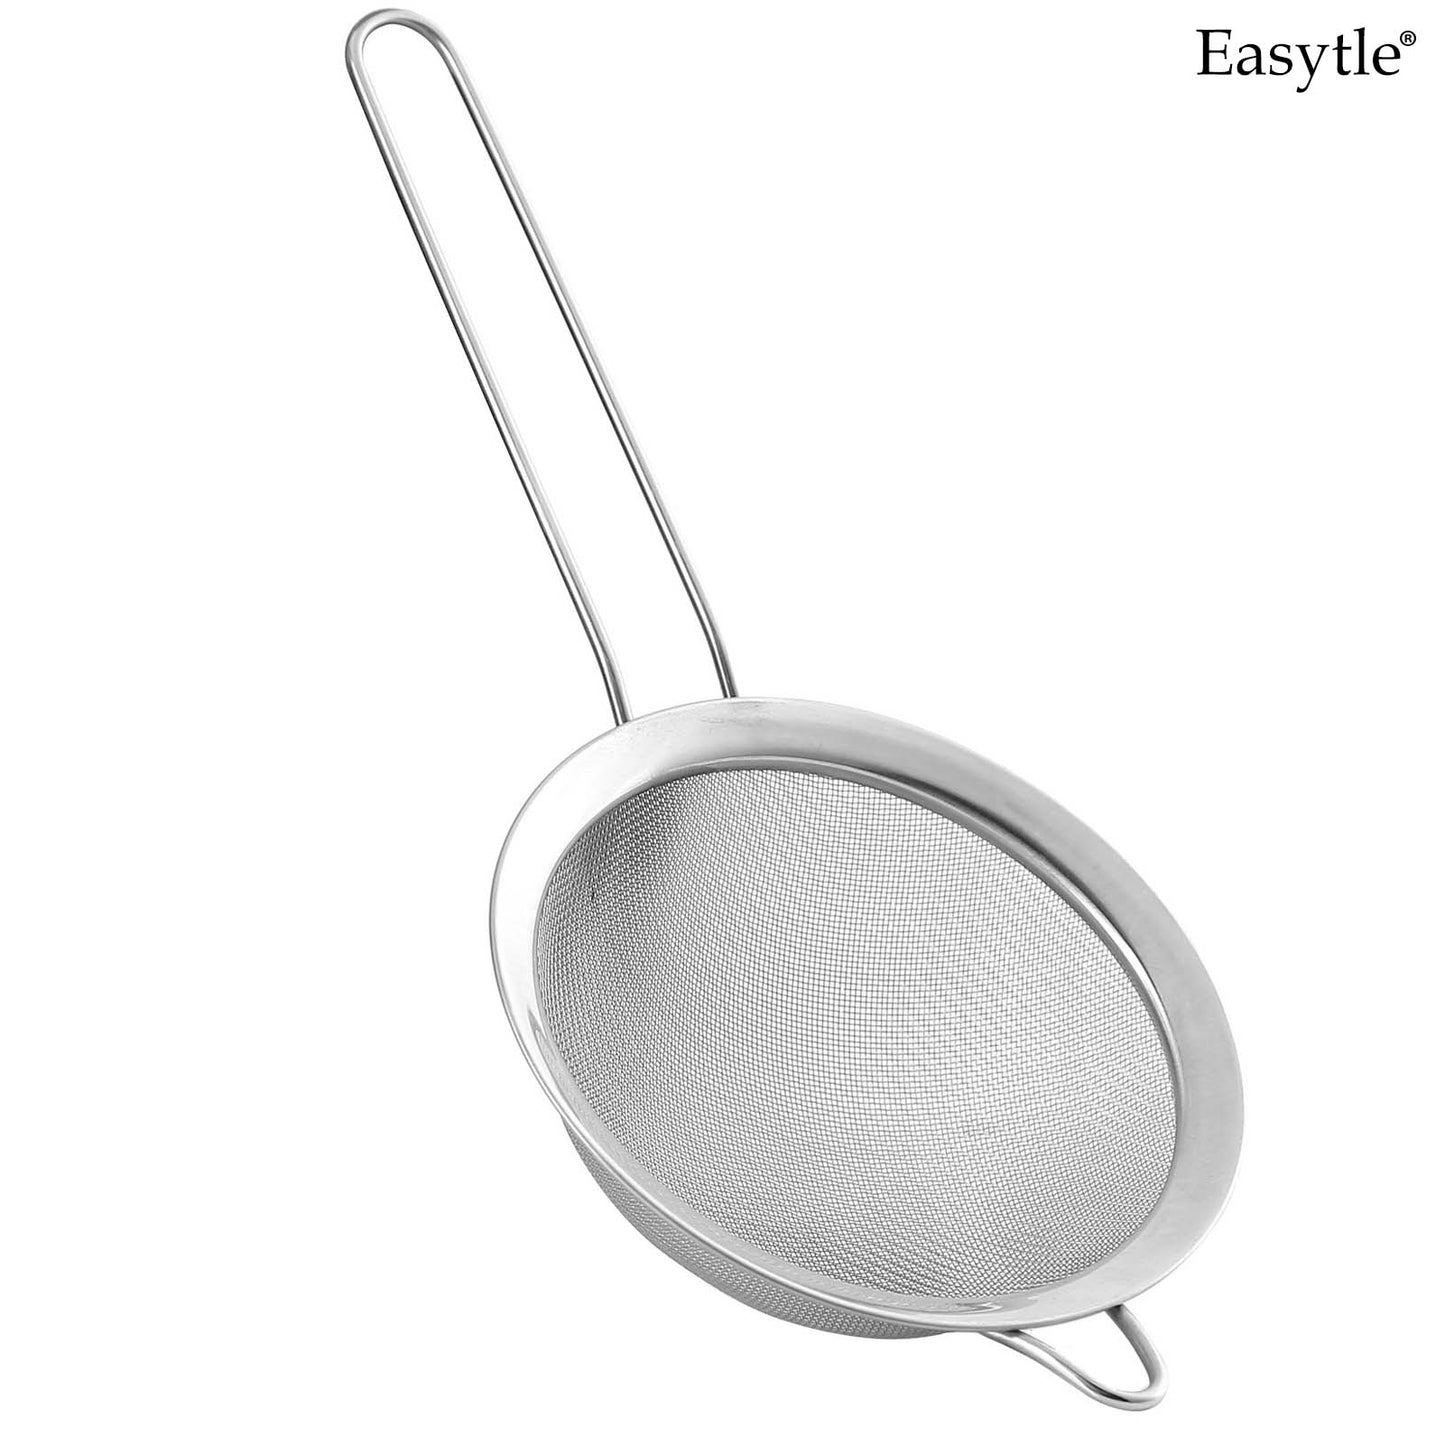 Easytle Strainers for household purposes, Premium Stainless Steel Colanders and Sifters, with Reinforced Frame and Sturdy Handle, Perfect for Kitchen & Bar, Filtering Tea, Coffee, Cocktail